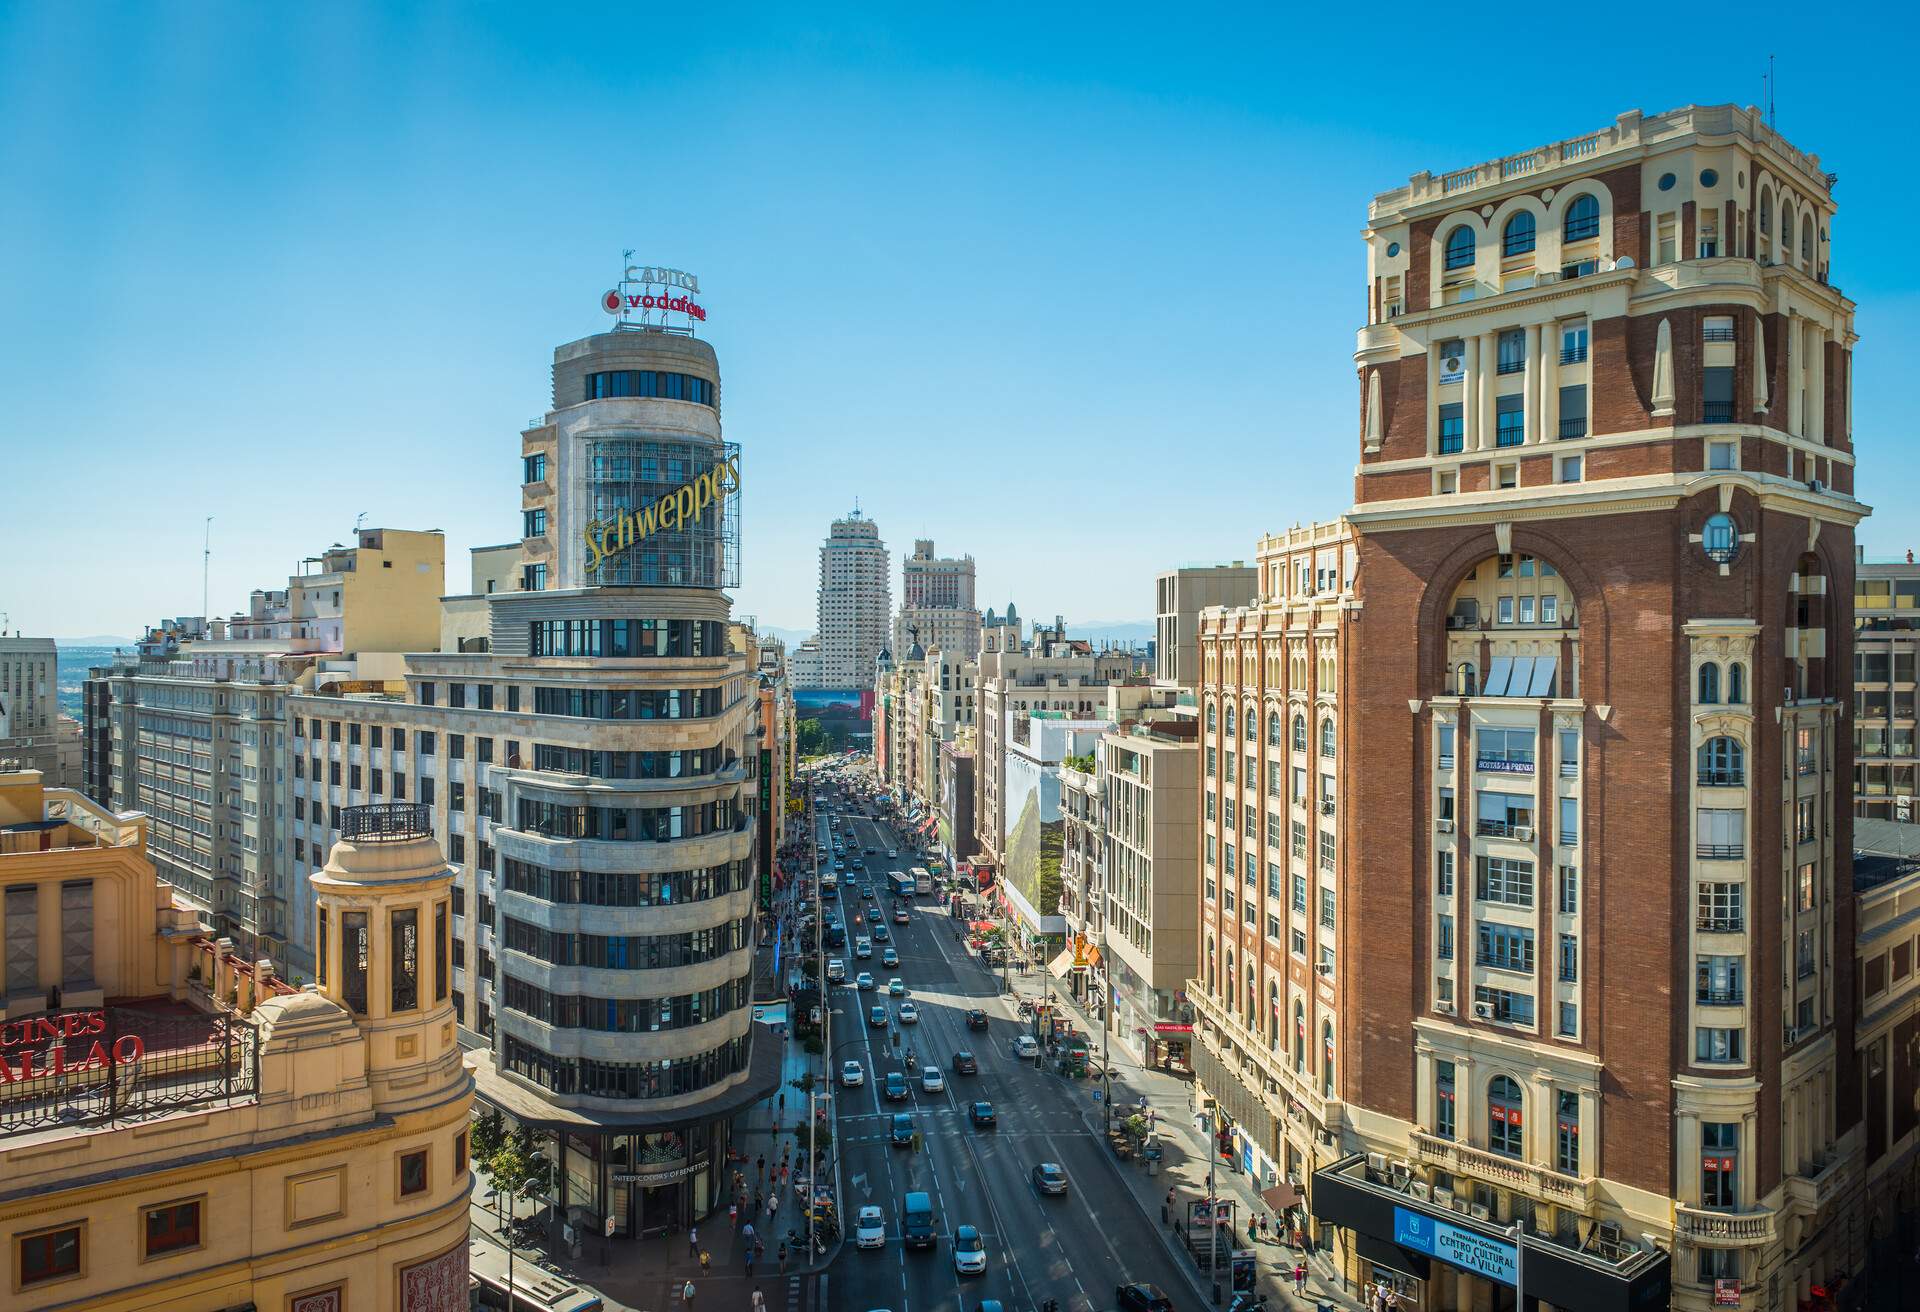 Crowds of shoppers, tourists and commuters bustling along the busy shopping street of Gran Via overlooked by the iconic billboards of this famous Madrid landmark, Spain.